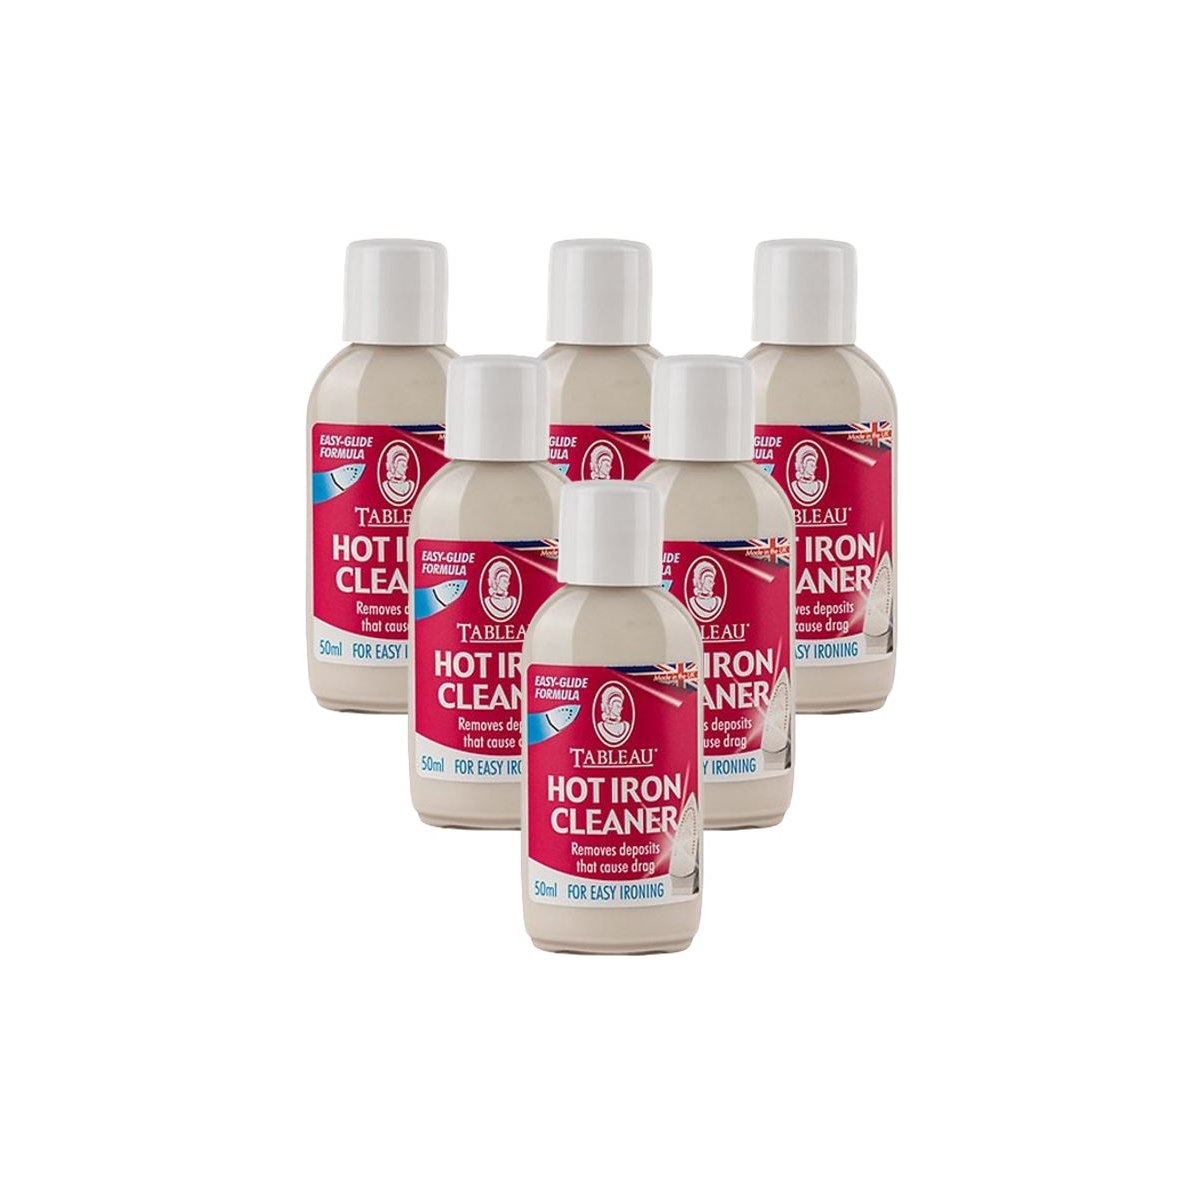 Case of 6 x Tableau Hot Iron Cleaner 50ml